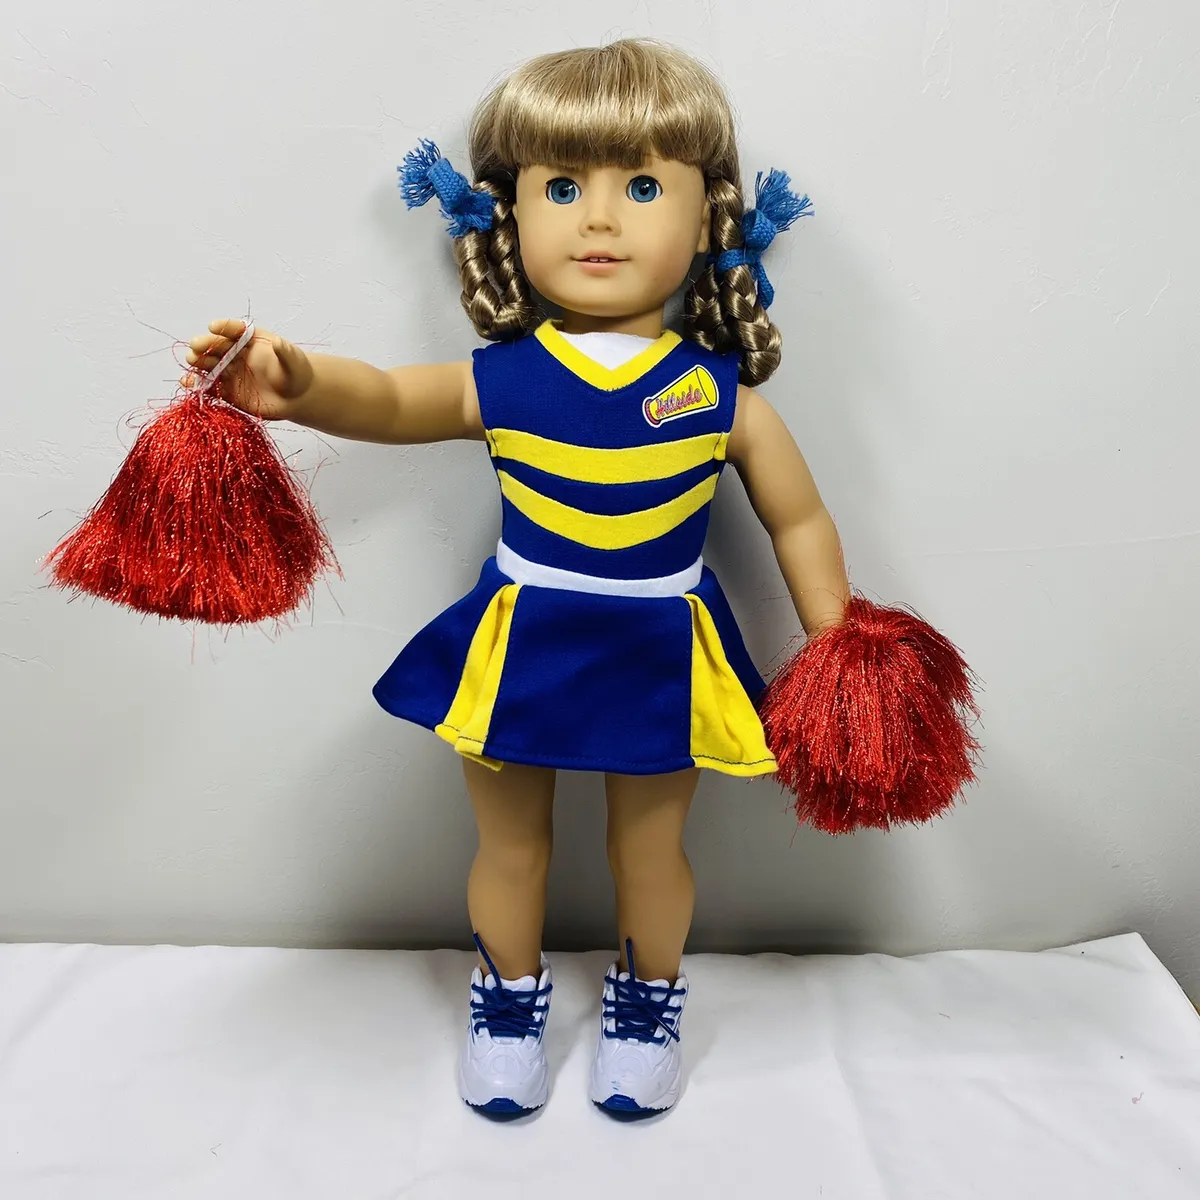 Blue Cheerleader Outfit Costume for 18 American Girl Doll Clothes